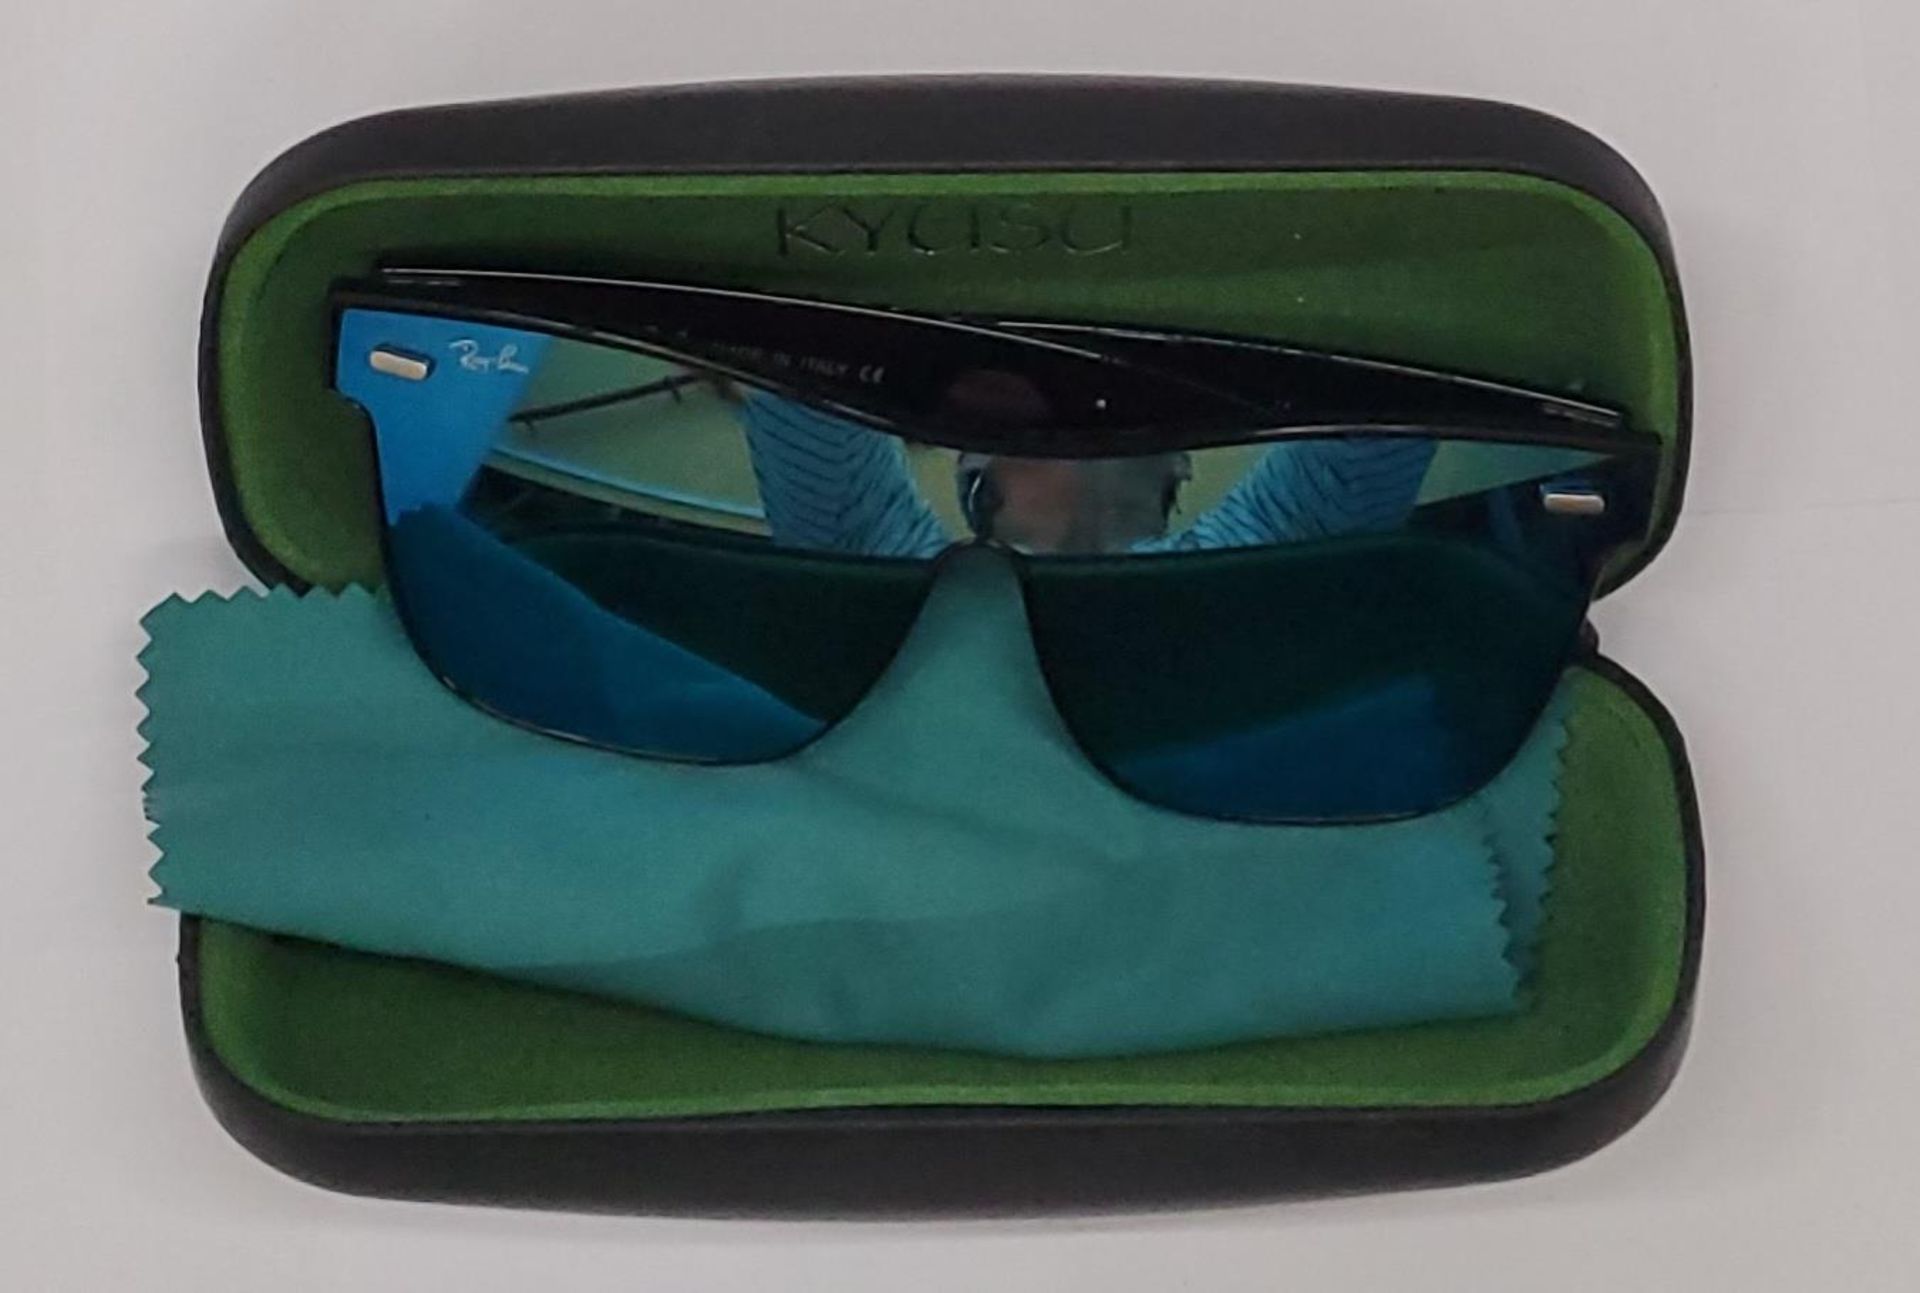 A PAIR OF SUNGLASSES MARKED 'RAY-BAN' IN A CASE - Image 2 of 2